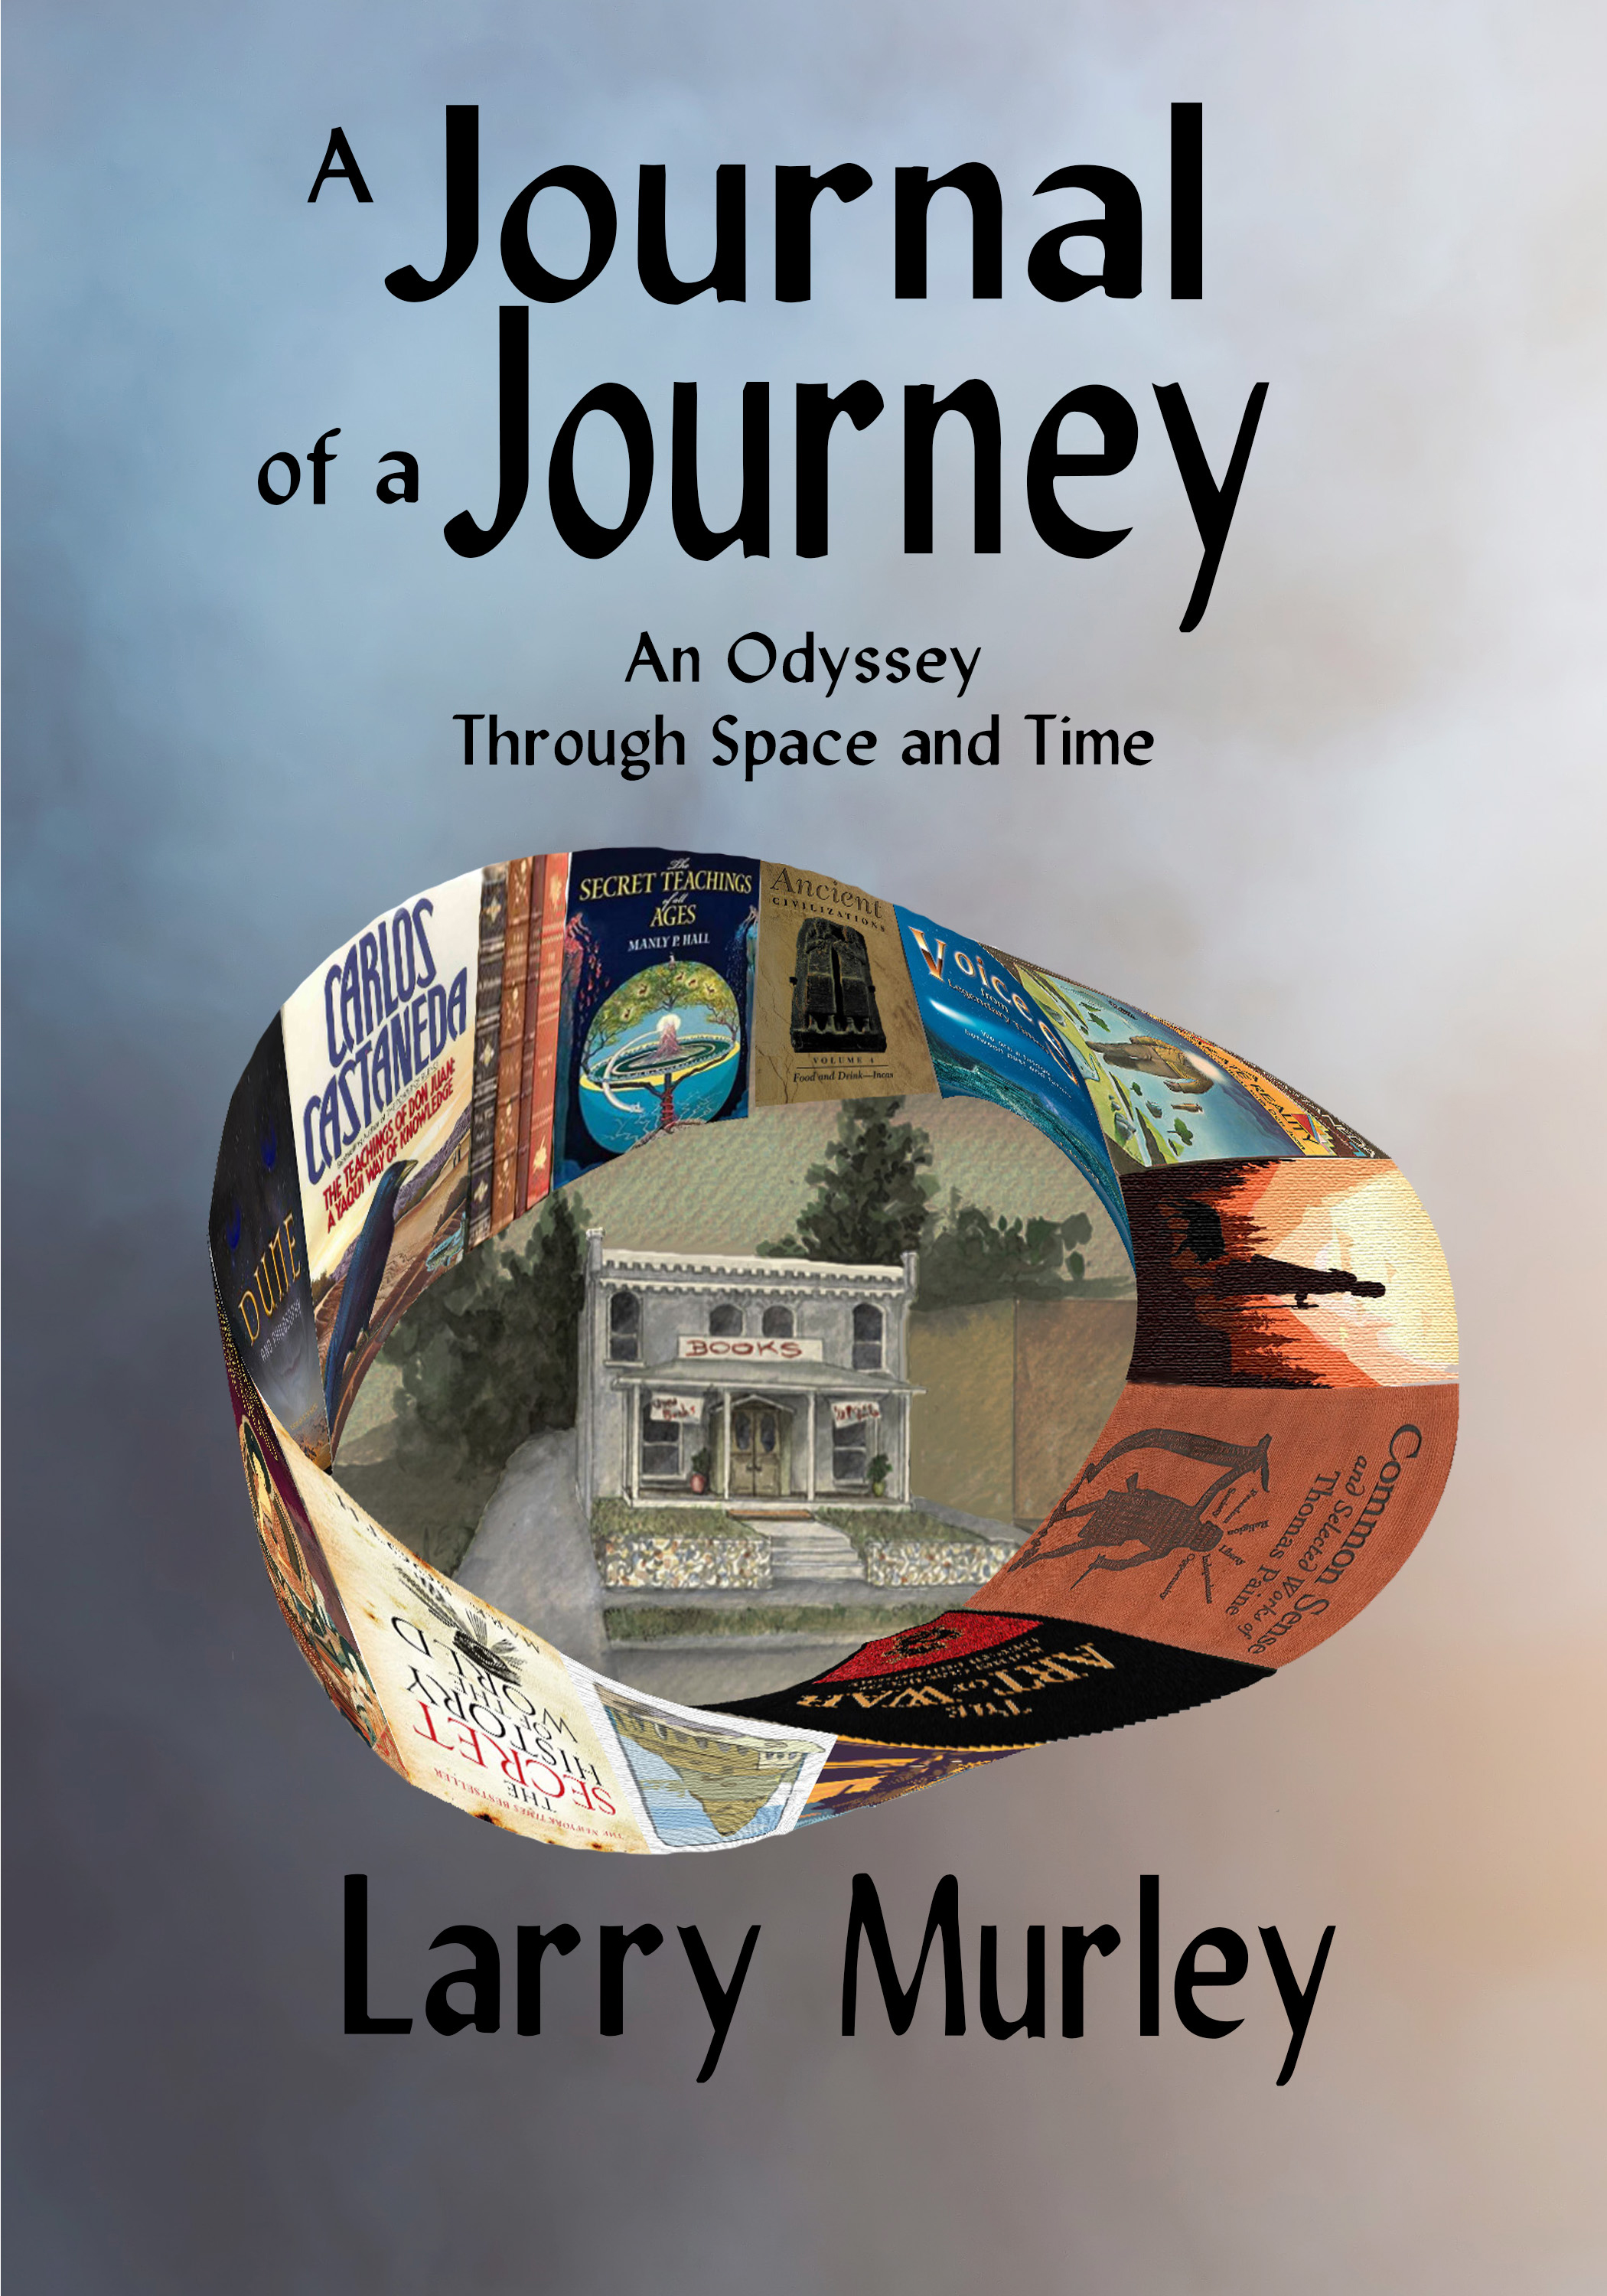 A Journal of a Journey - An Odyssey Through Space & time - A Novel by Larry Murley